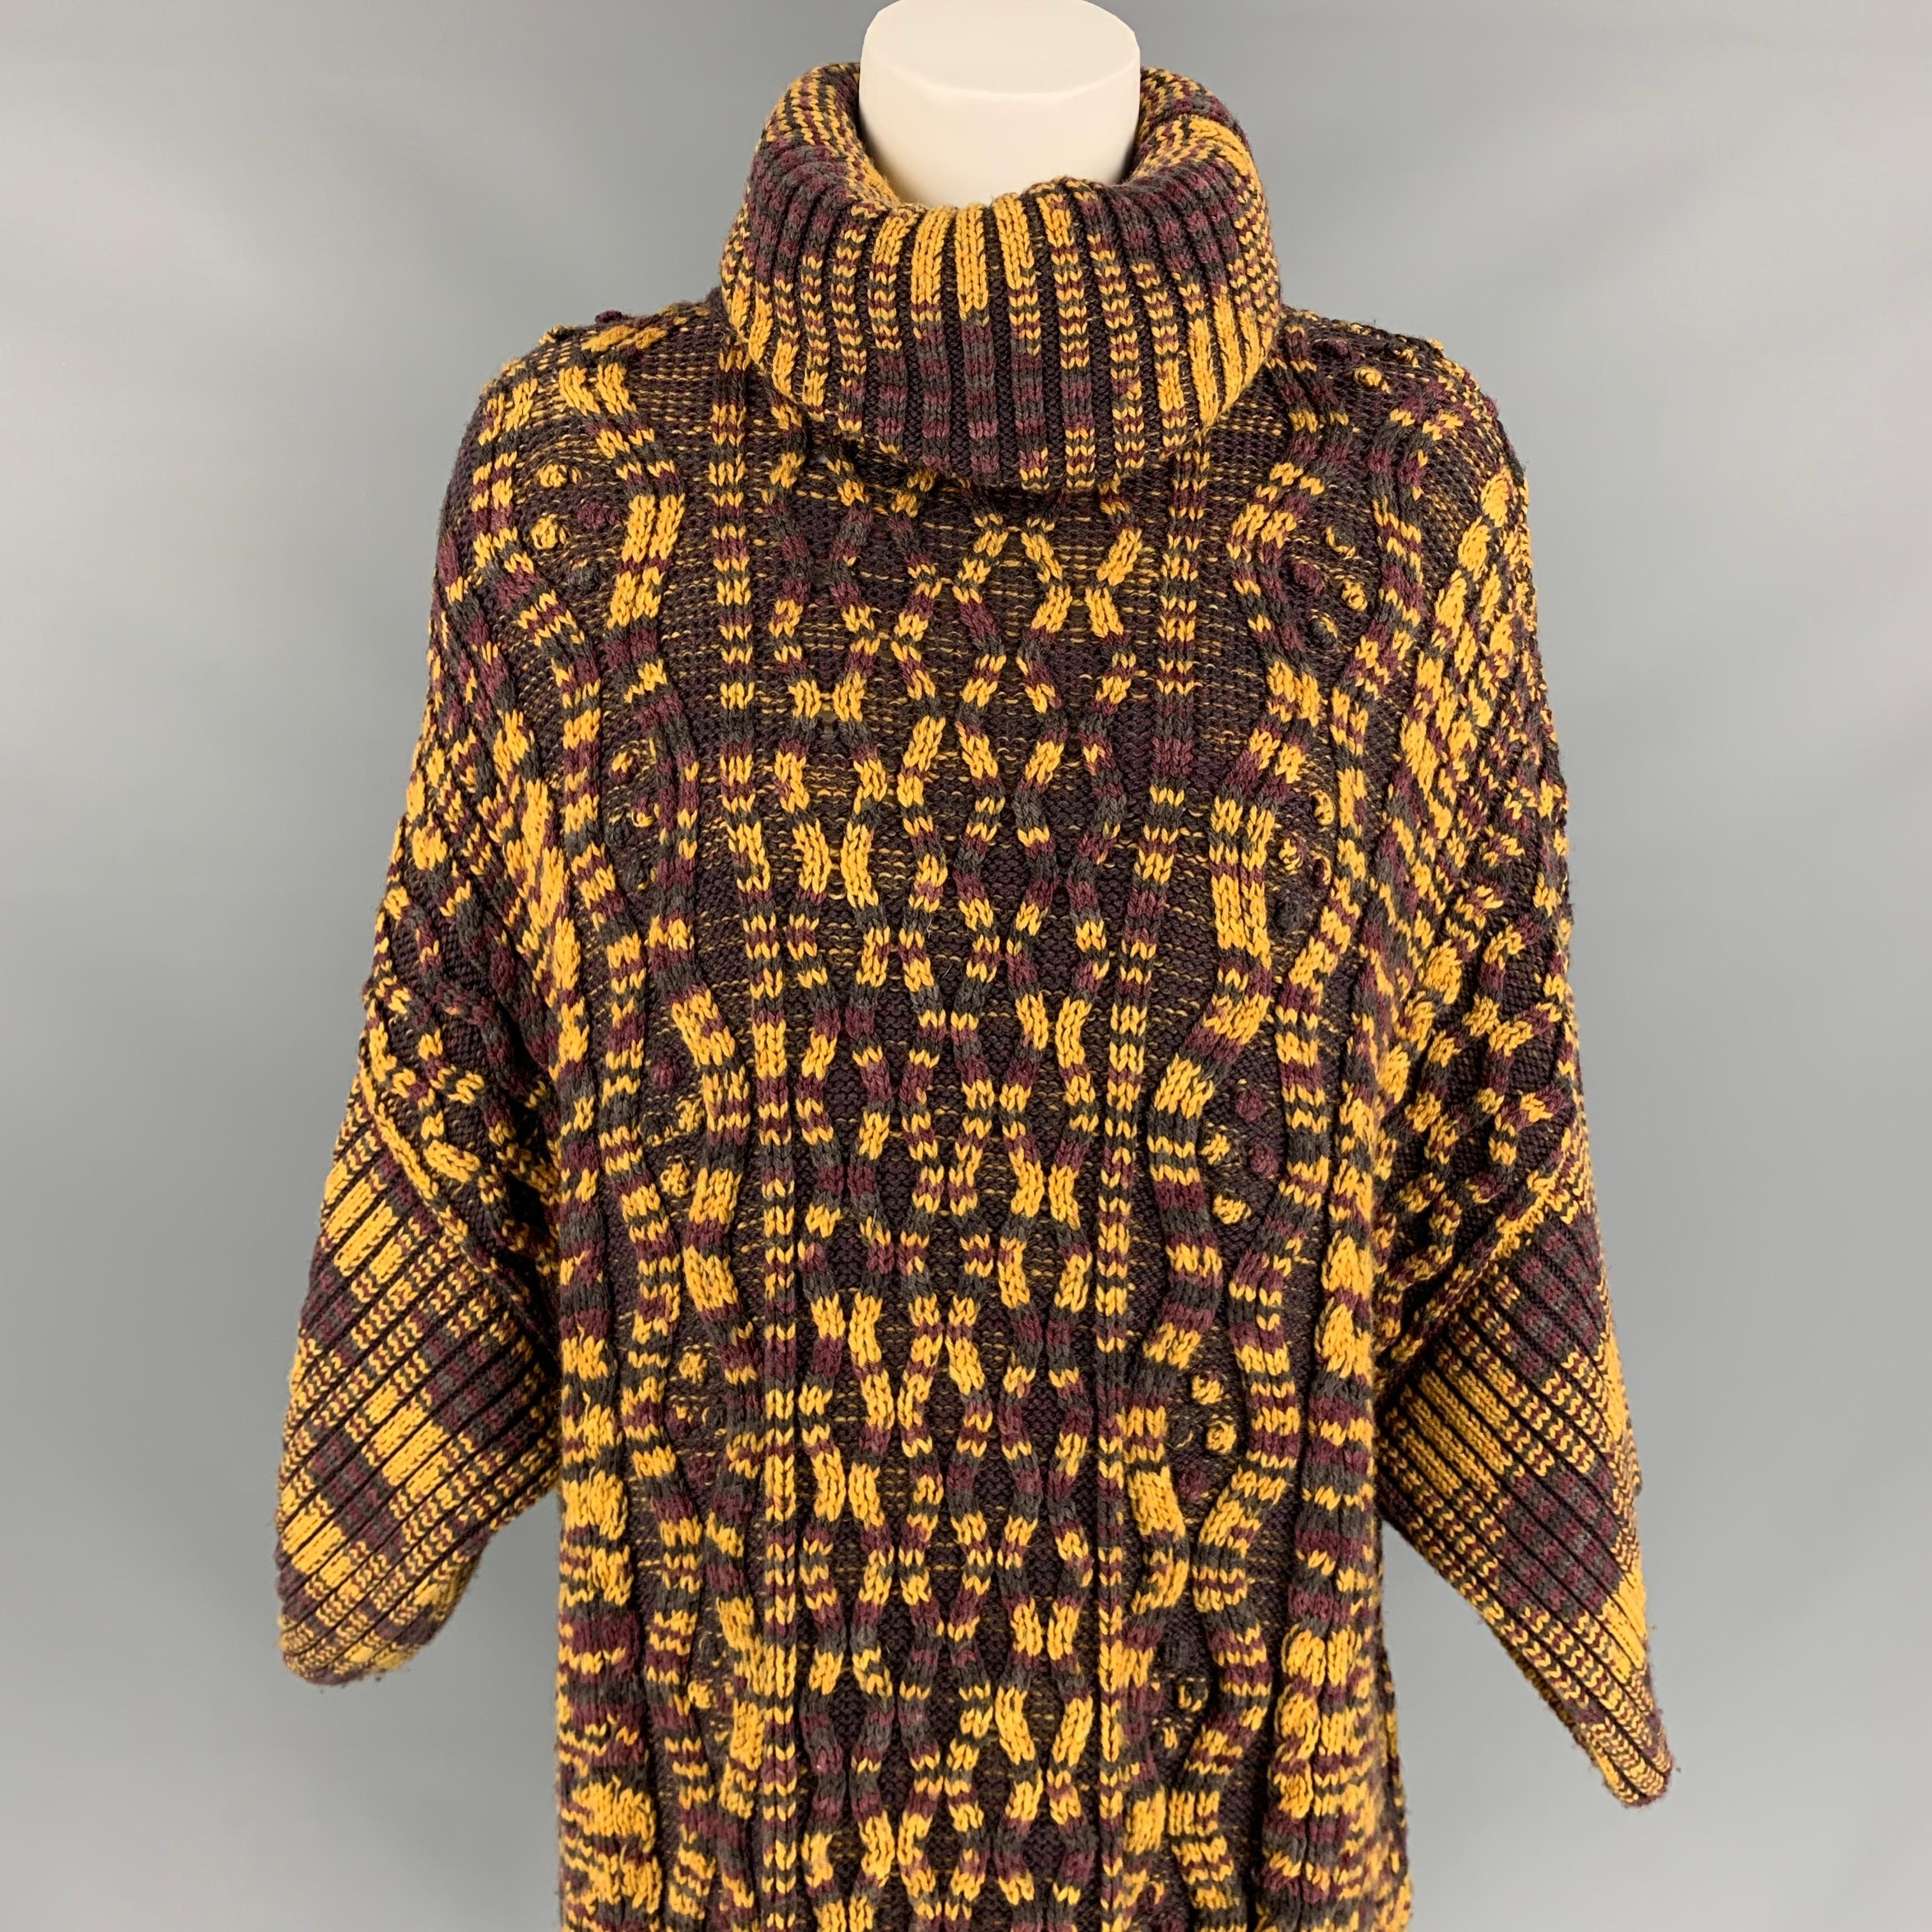 M MISSONI sweater comes in a gold & purple knitted wool blend featuring a oversized fit, 3/4 sleeves, and a turtleneck. Made in Italy.

Very Good Pre-Owned Condition.
Marked: M

Measurements:

Shoulder: 27 in.
Bust: 44 in.
Sleeve: 9.5 in.
Length: 38